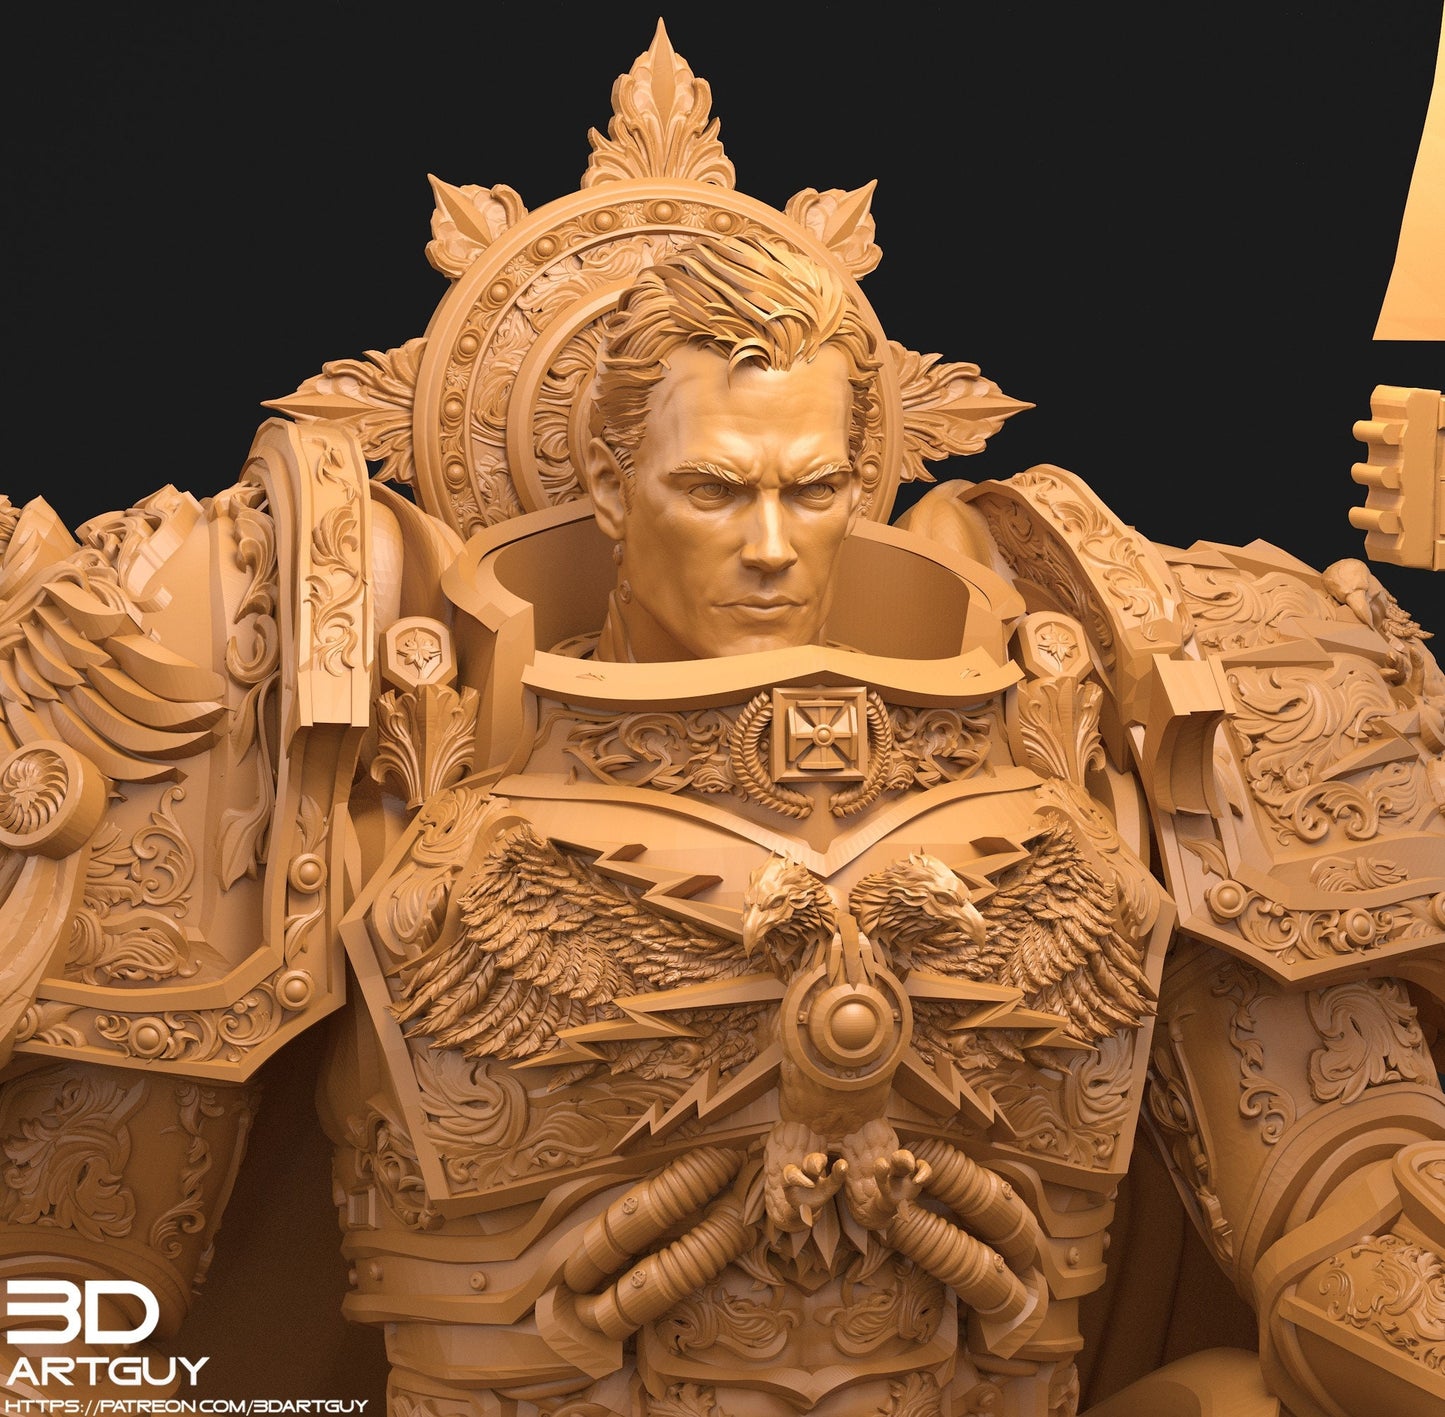 Lord of Guardians - 3 Head options - 2 Pose Options - 50mm scale - Multi-piece Kit - Advanced